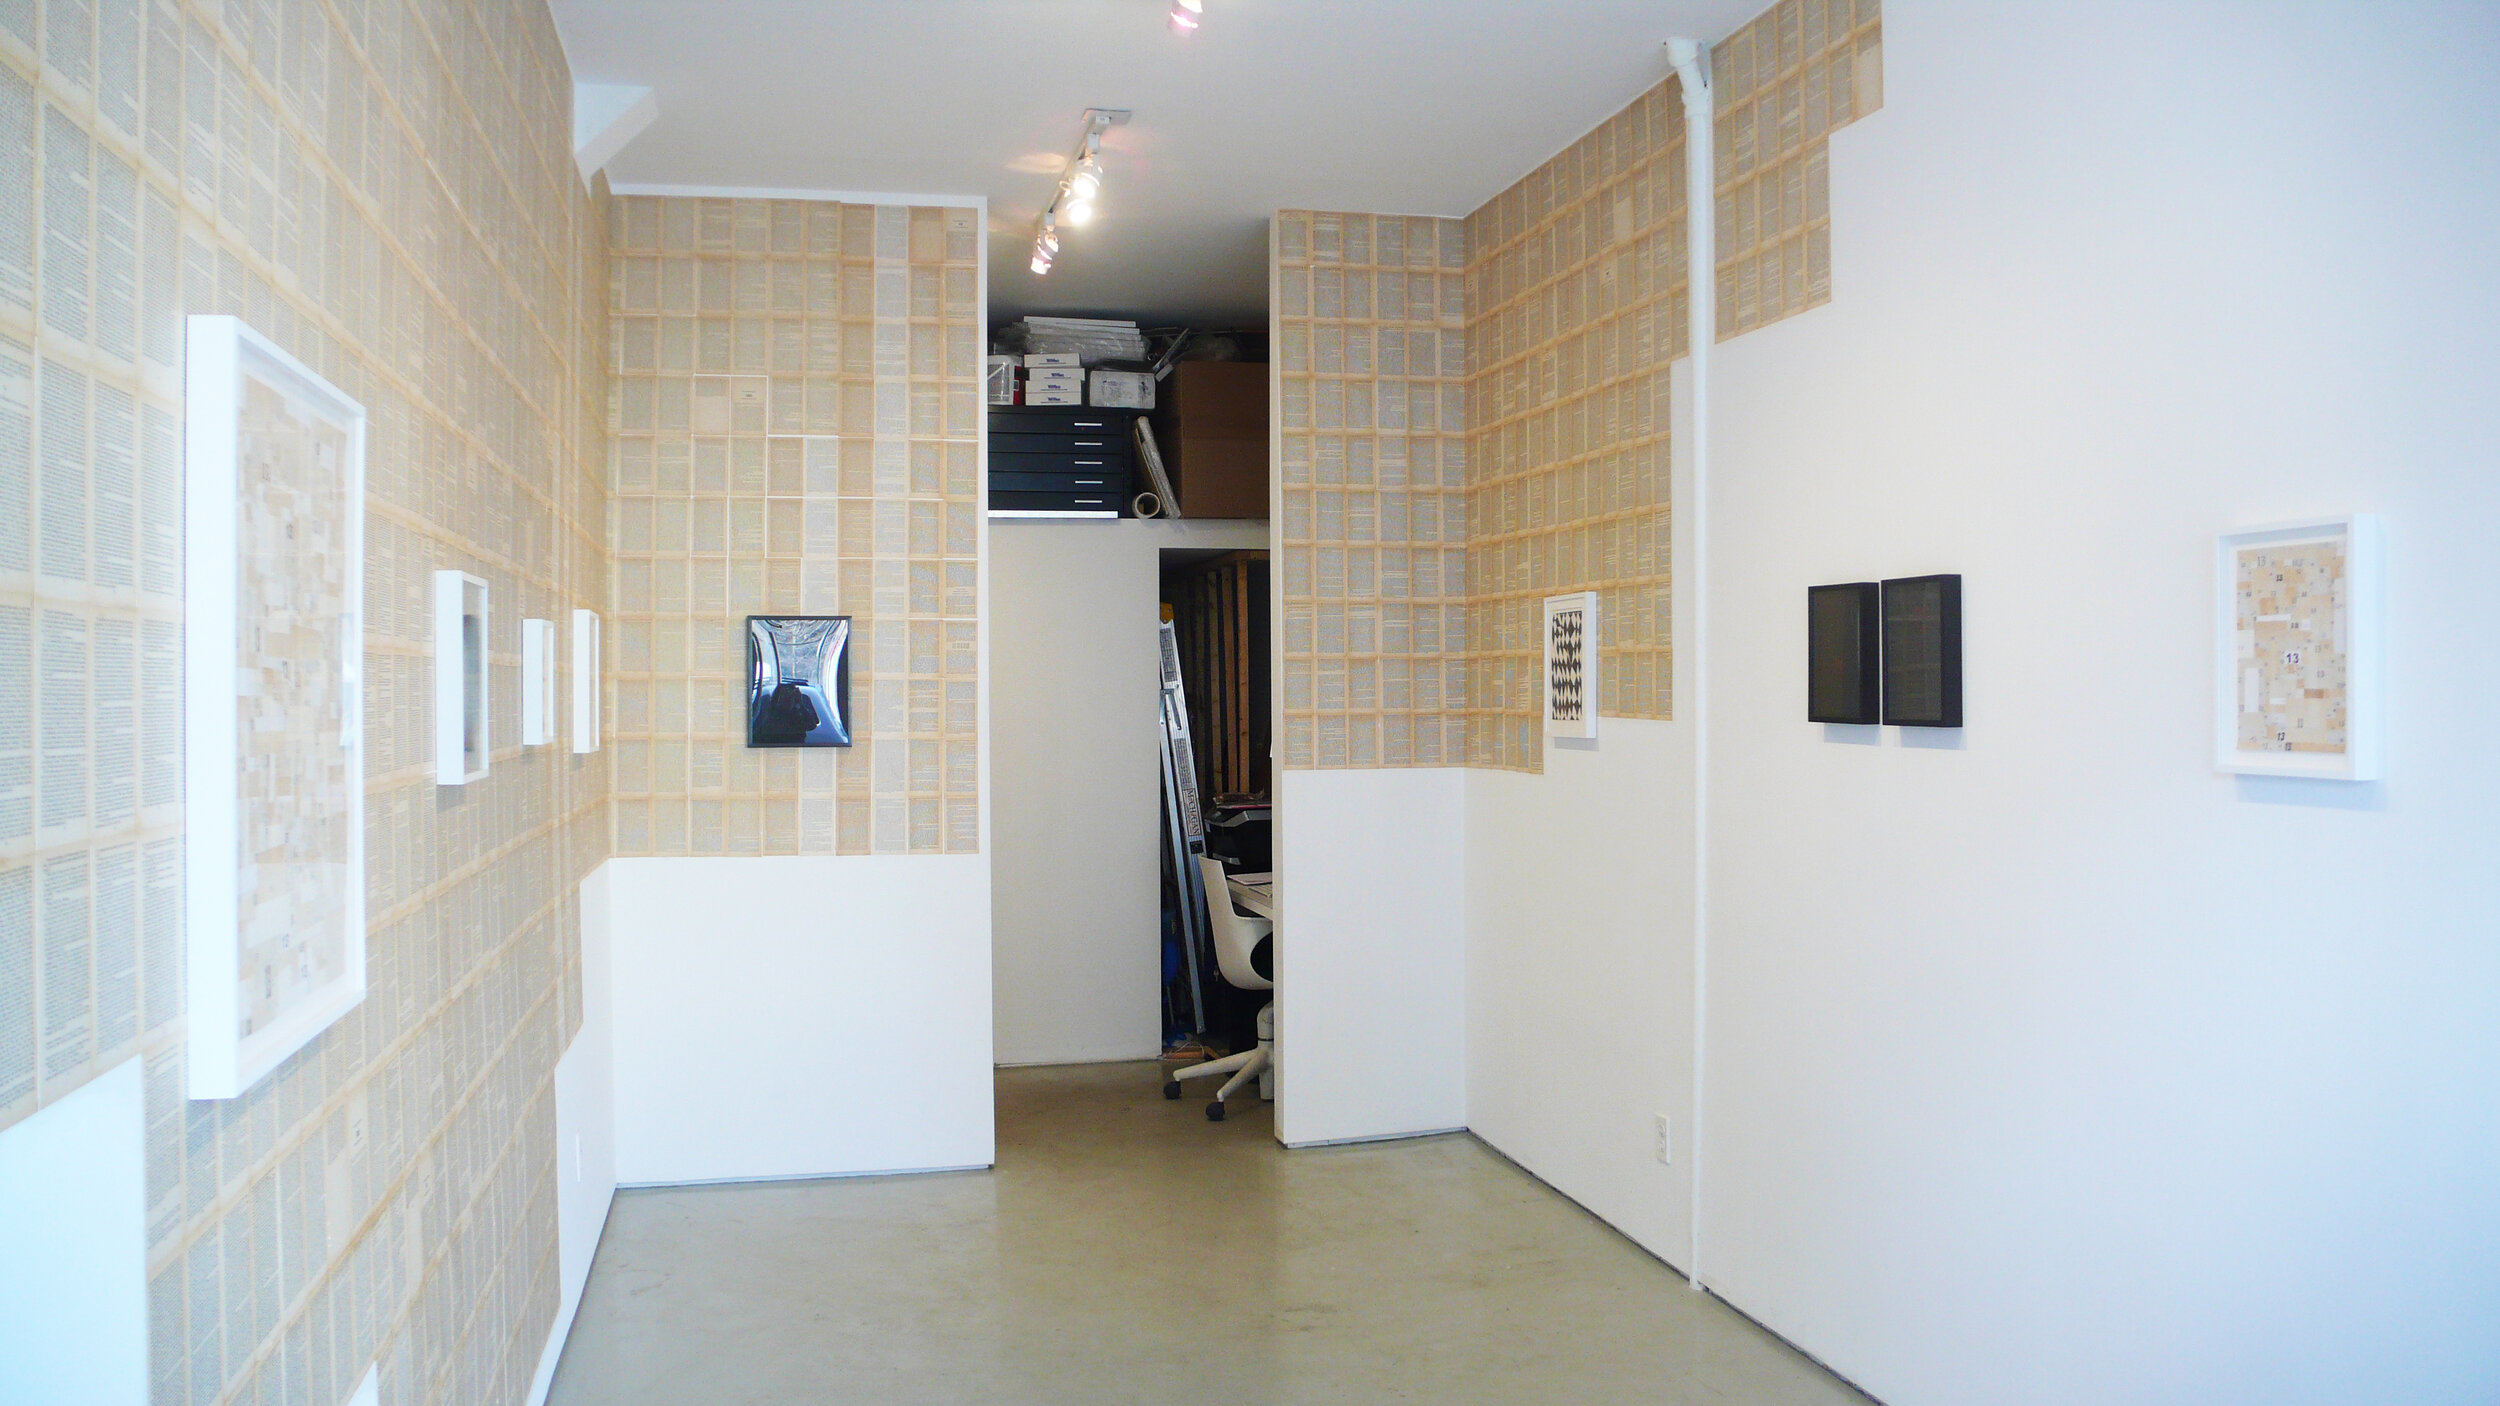 Installation image from the 2009 Gary Rough exhibition, I WANT TO TELL YOU, at Cindy Rucker Gallery, Number 35